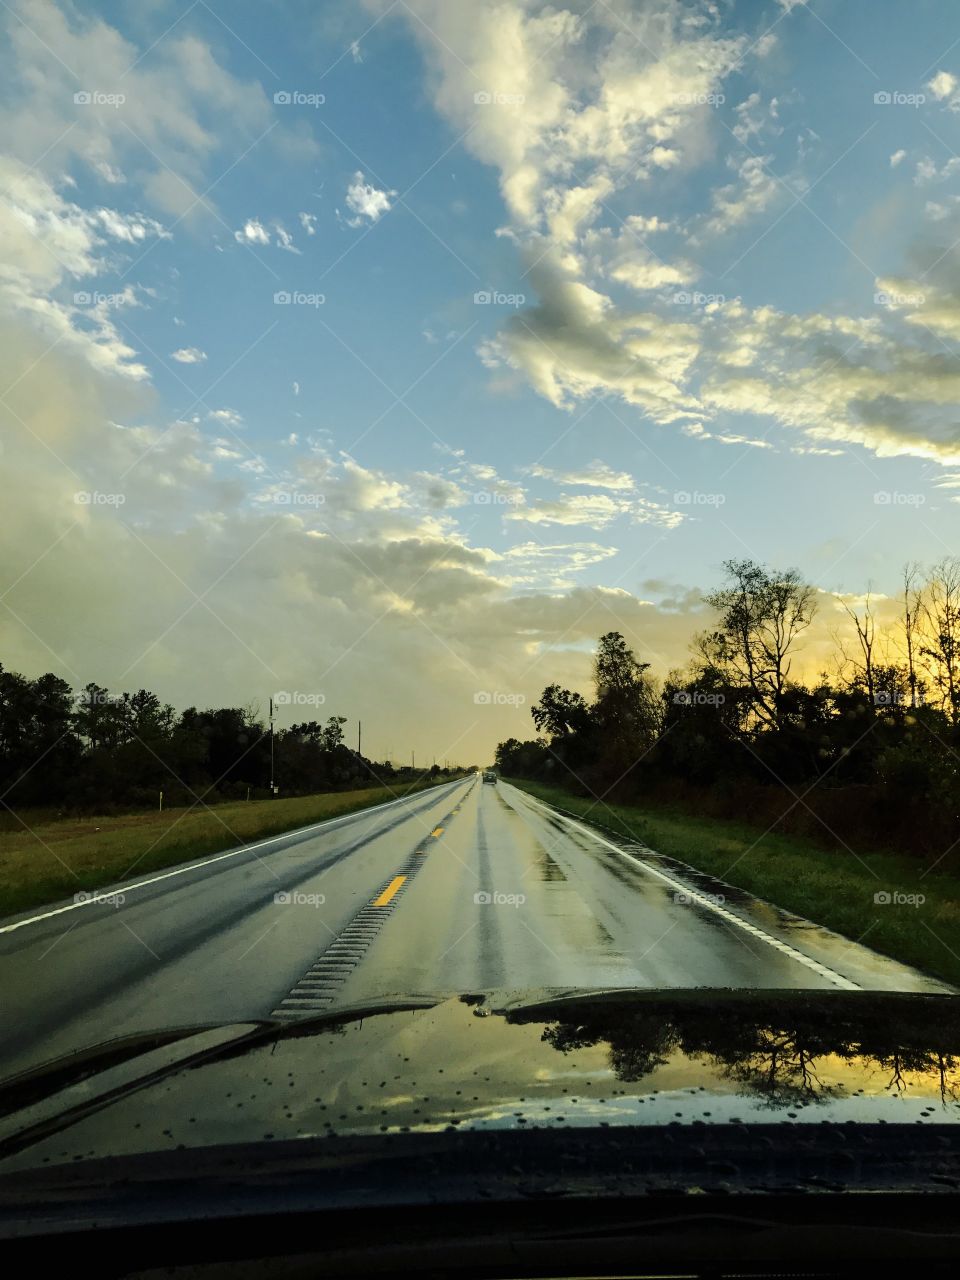 Rainy days, long drives and sunsets... very calm & relaxing.